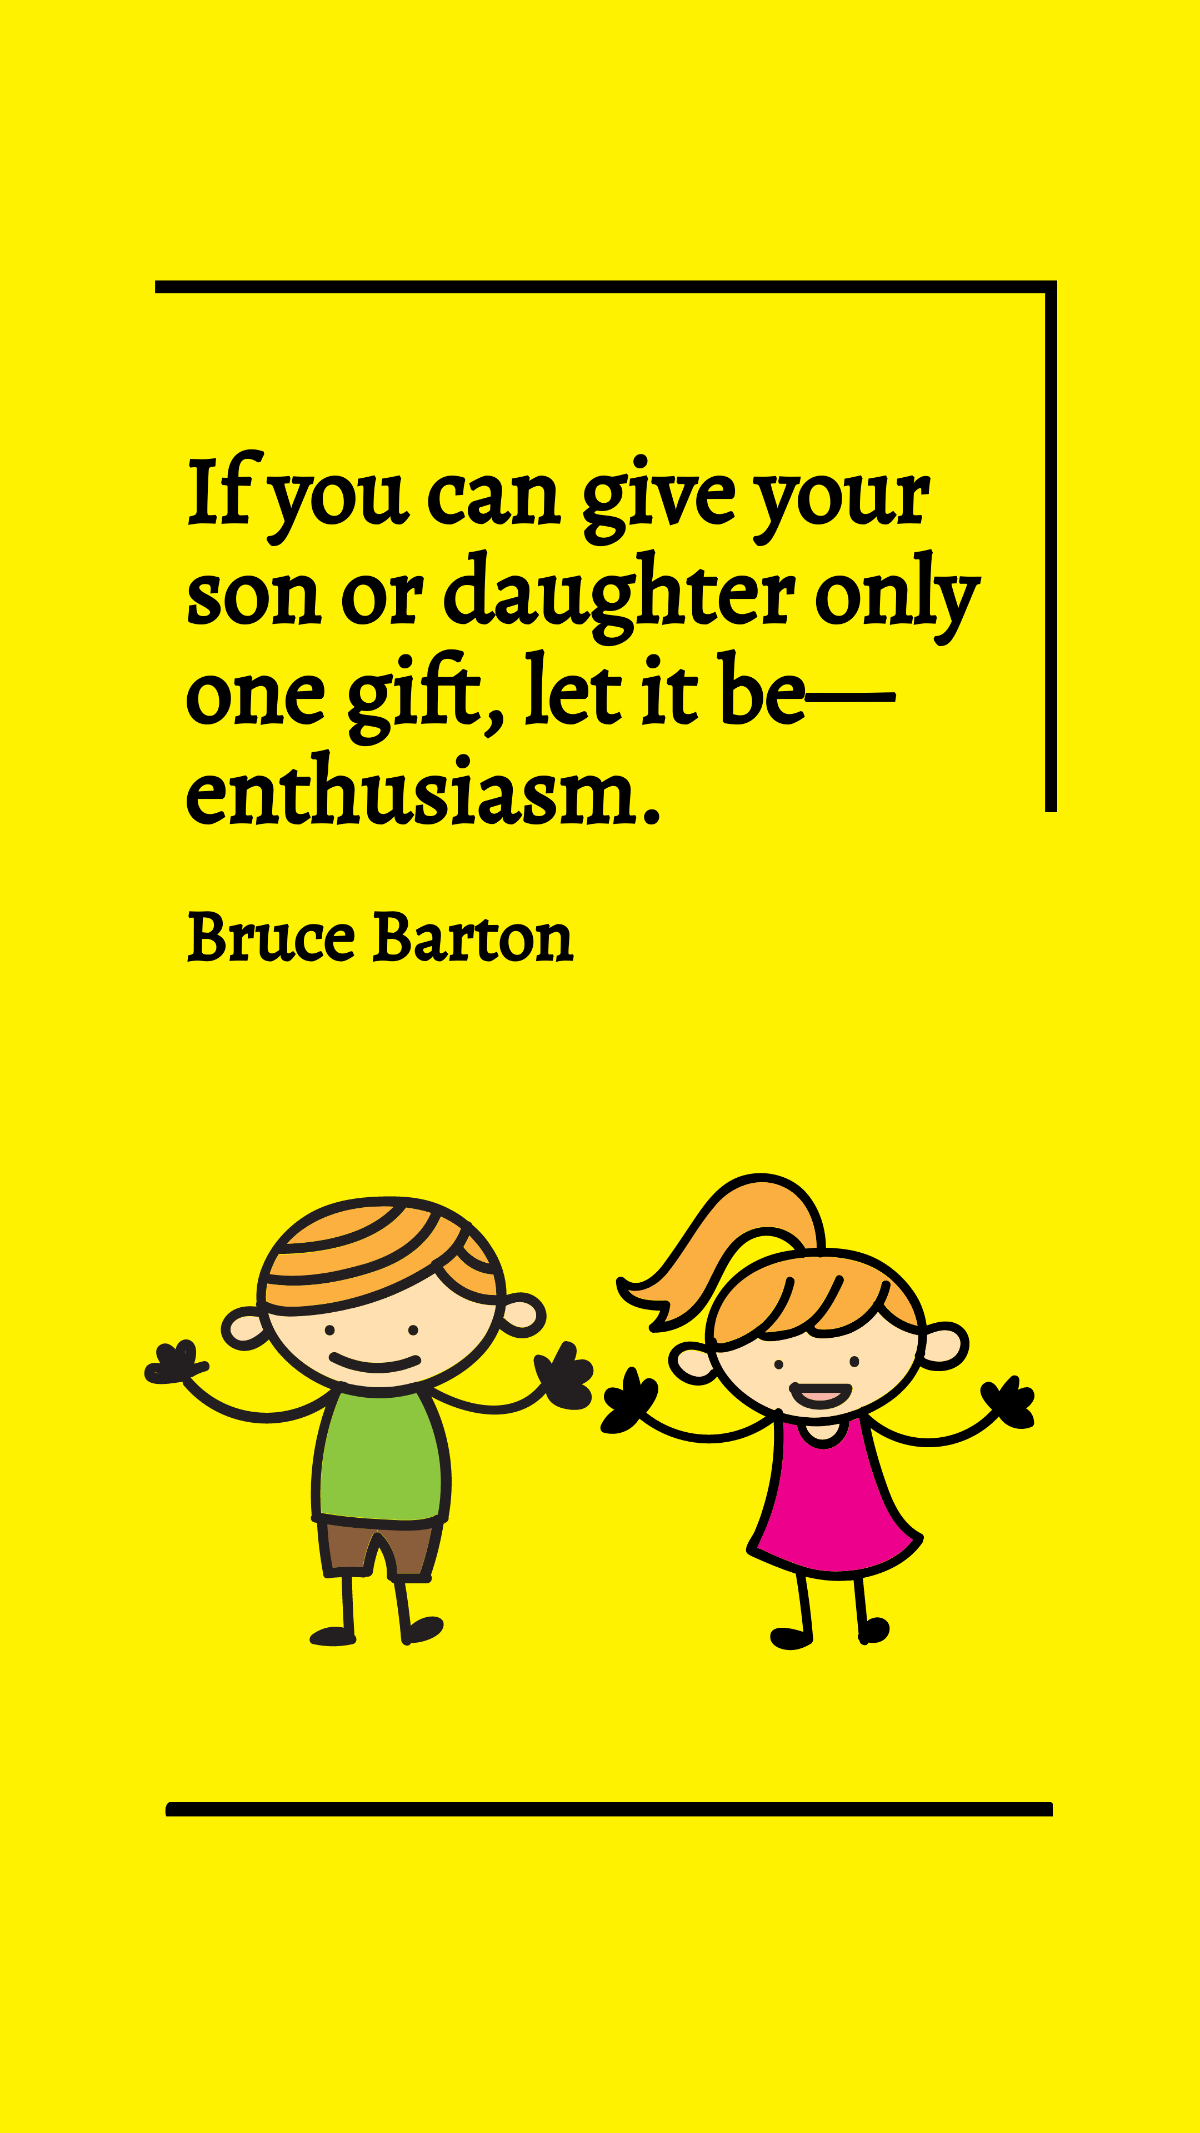 Free Bruce Barton - If you can give your son or daughter only one gift, let it be - enthusiasm. Template